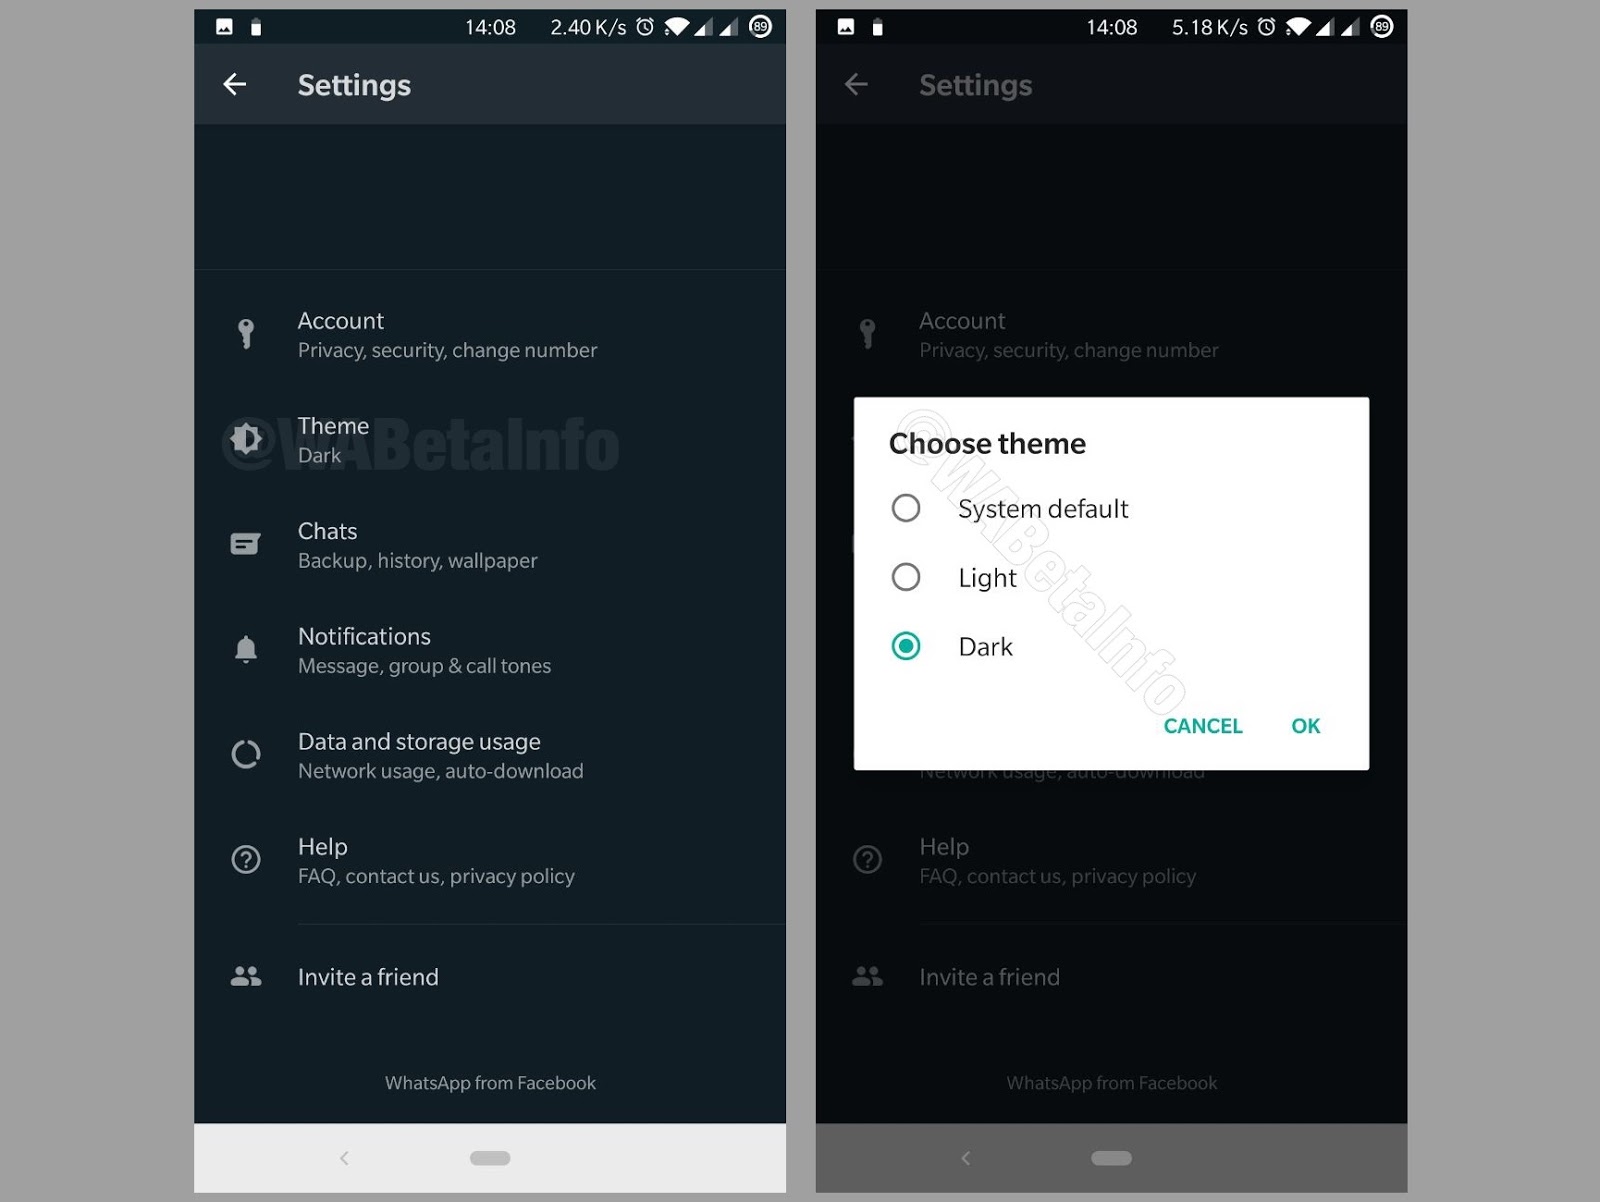 WHATSAPP'S NEW DARK MODE FEATURE TO BE RELEASED SOON FOR ANDROID USERS